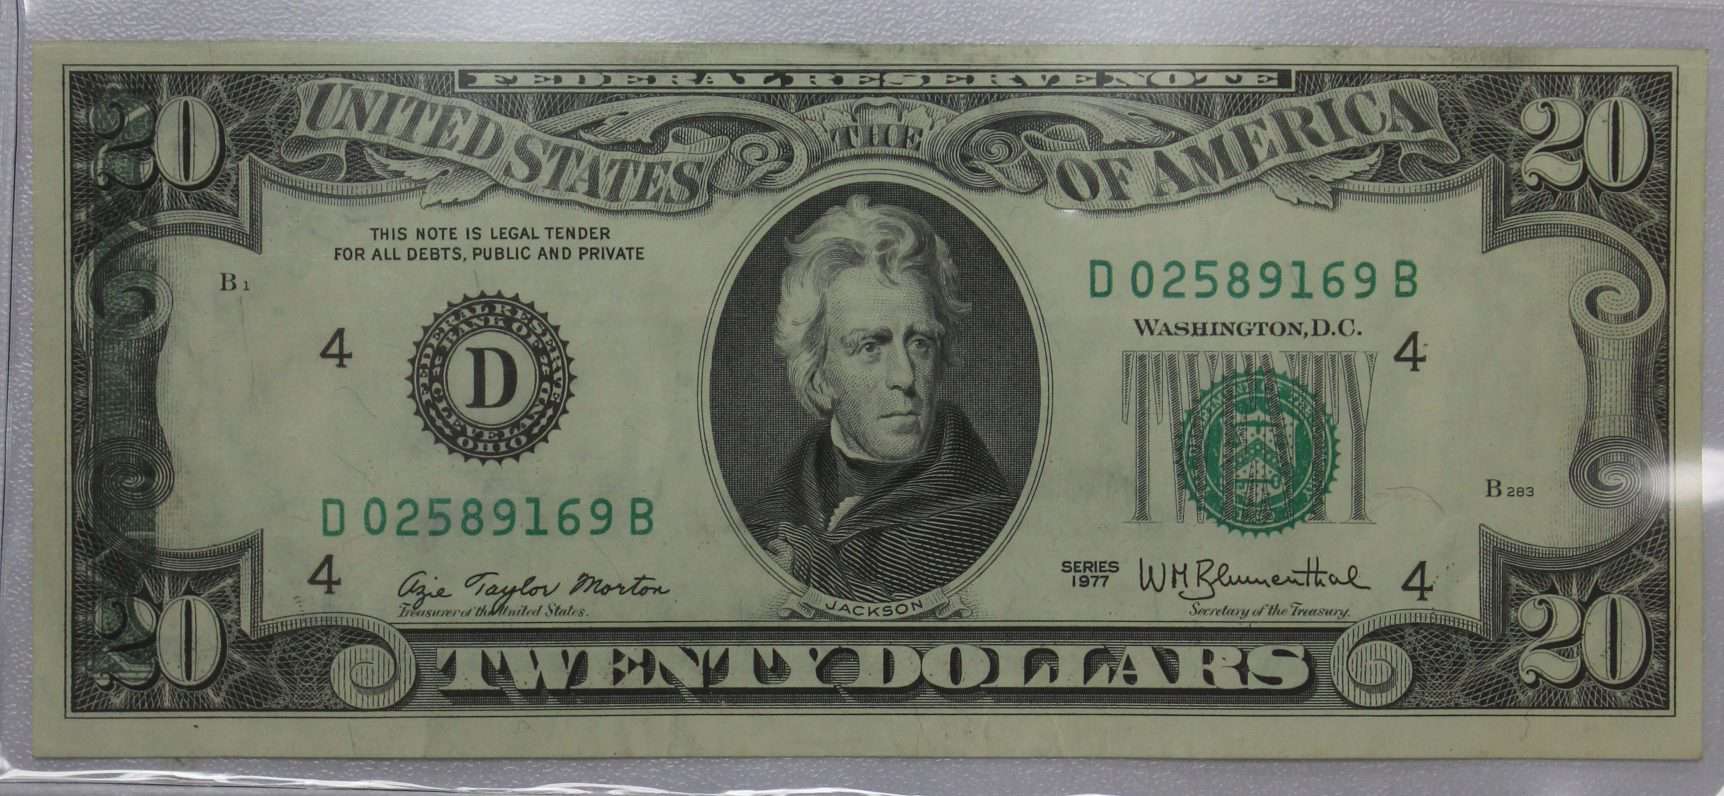 The Obverse of the 1977 20 Dollar Bill